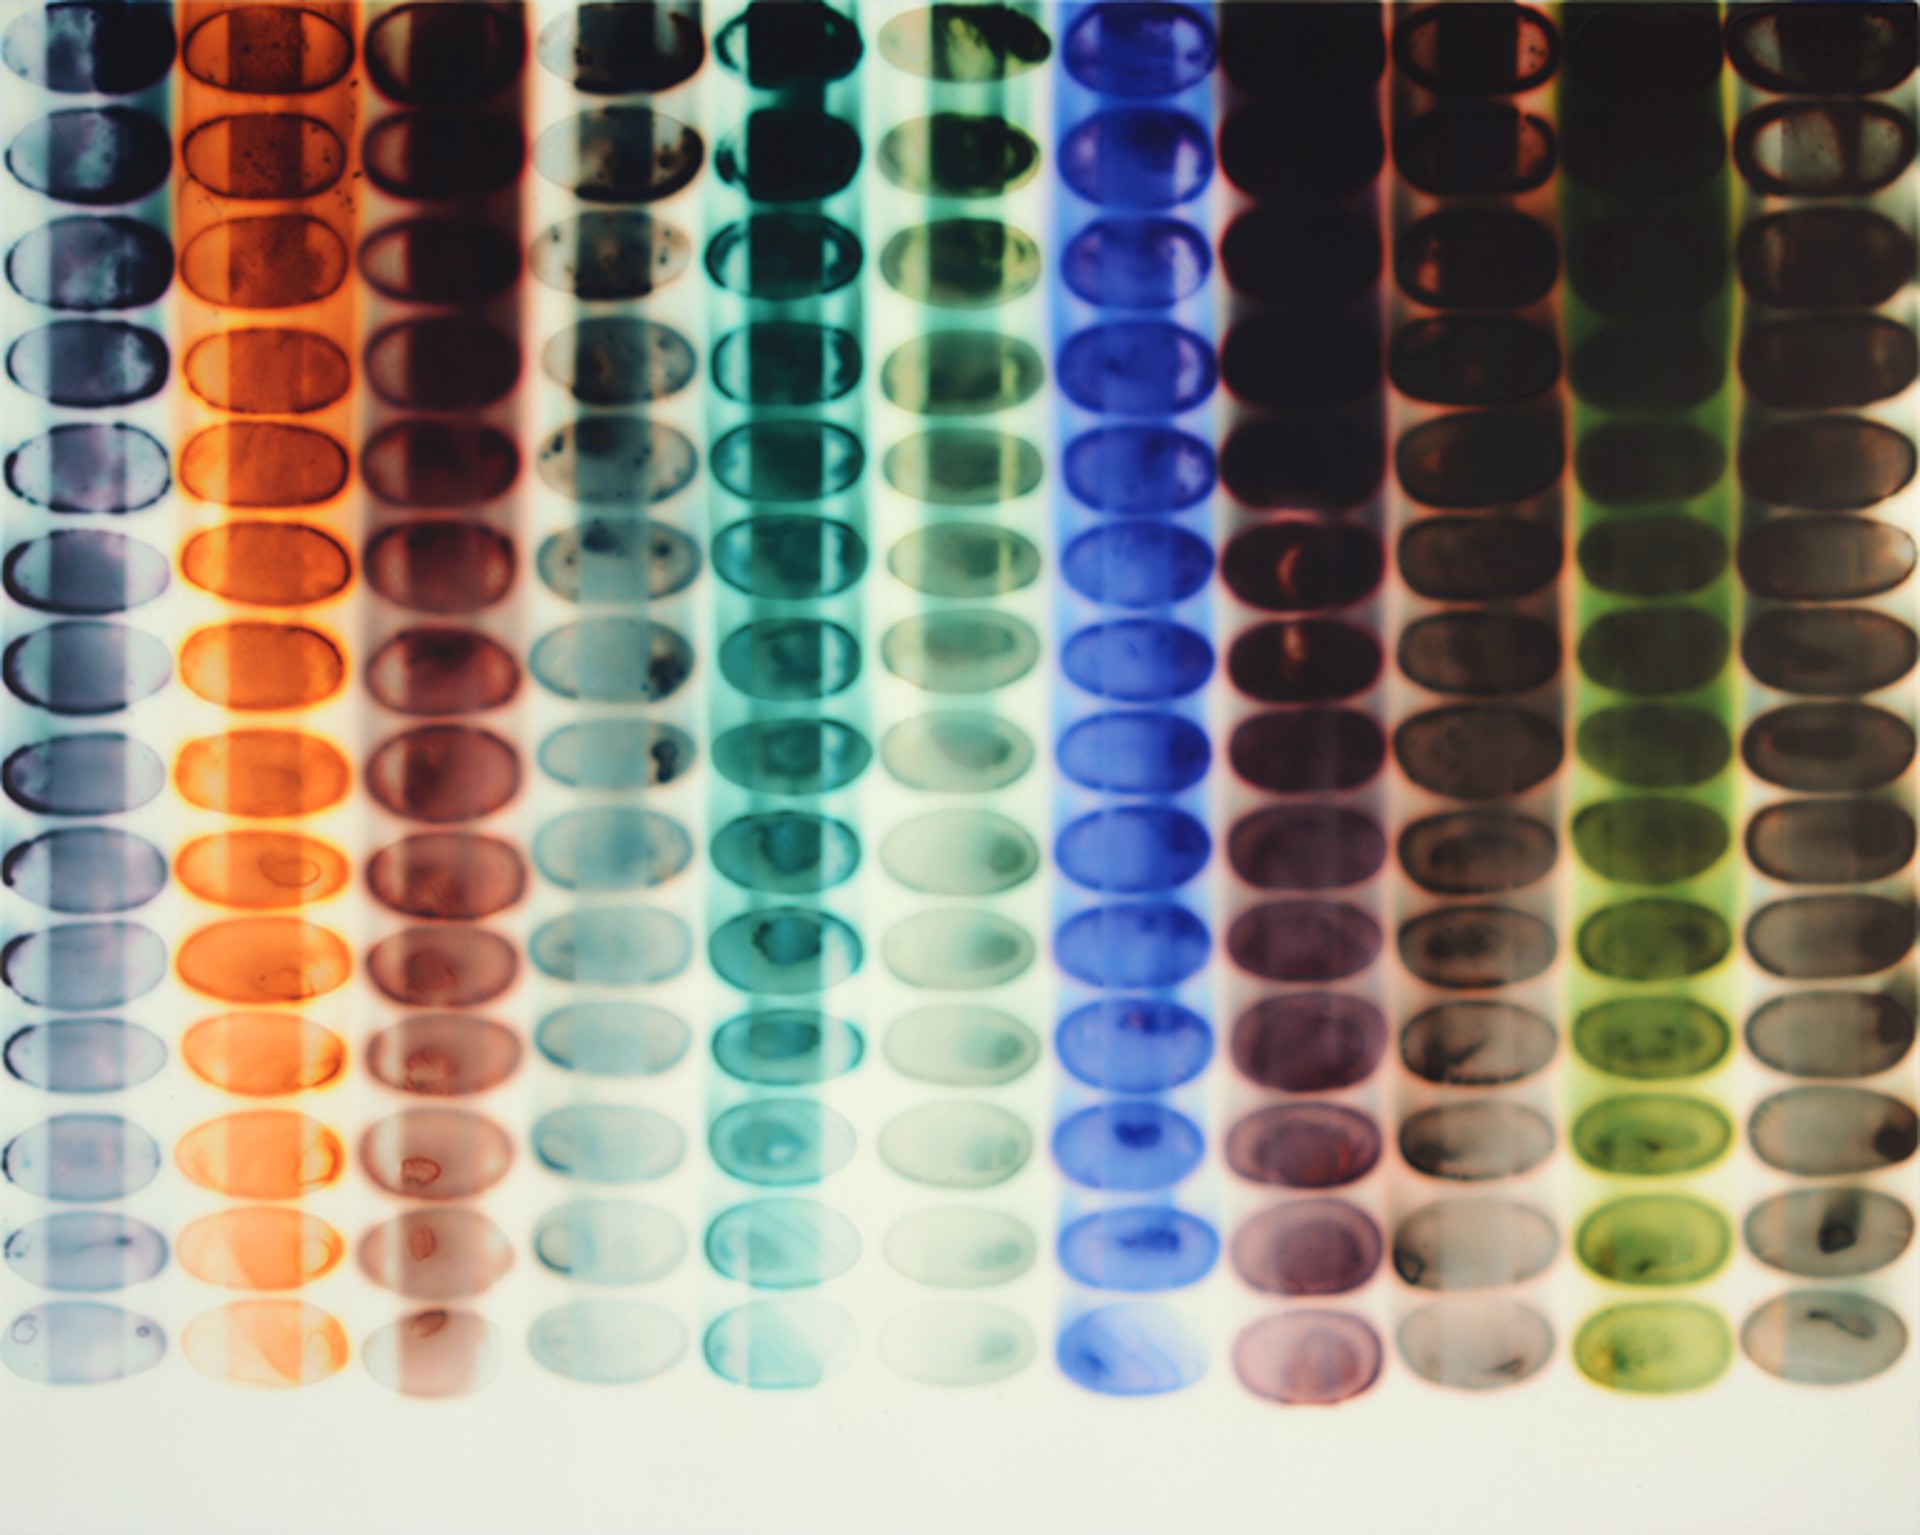 11 Dilutions by Jaq Chartier